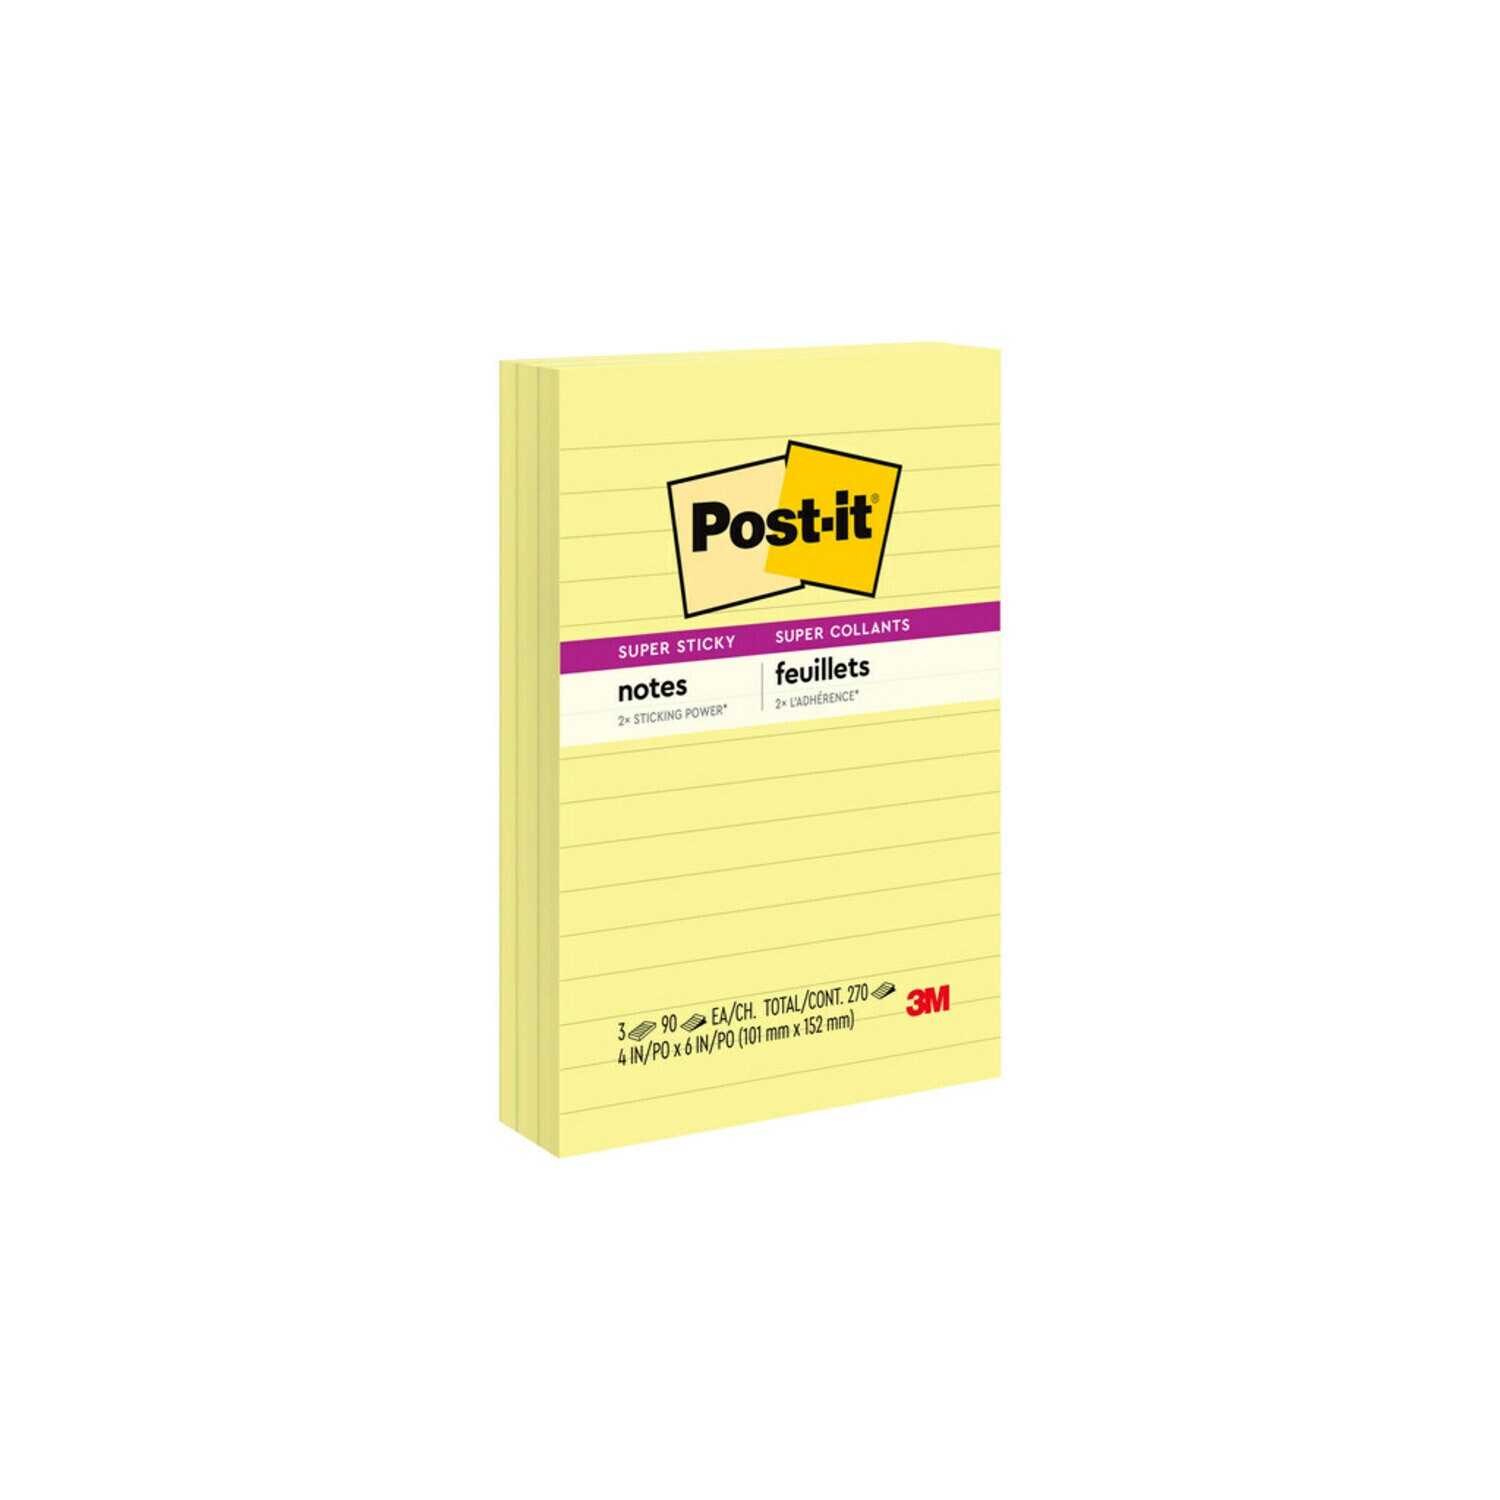 7100230247 - Post-it Super Sticky Notes 660-3SSCY, 4 in x 6 in (101 mm x 152 mm), Canary Yellow